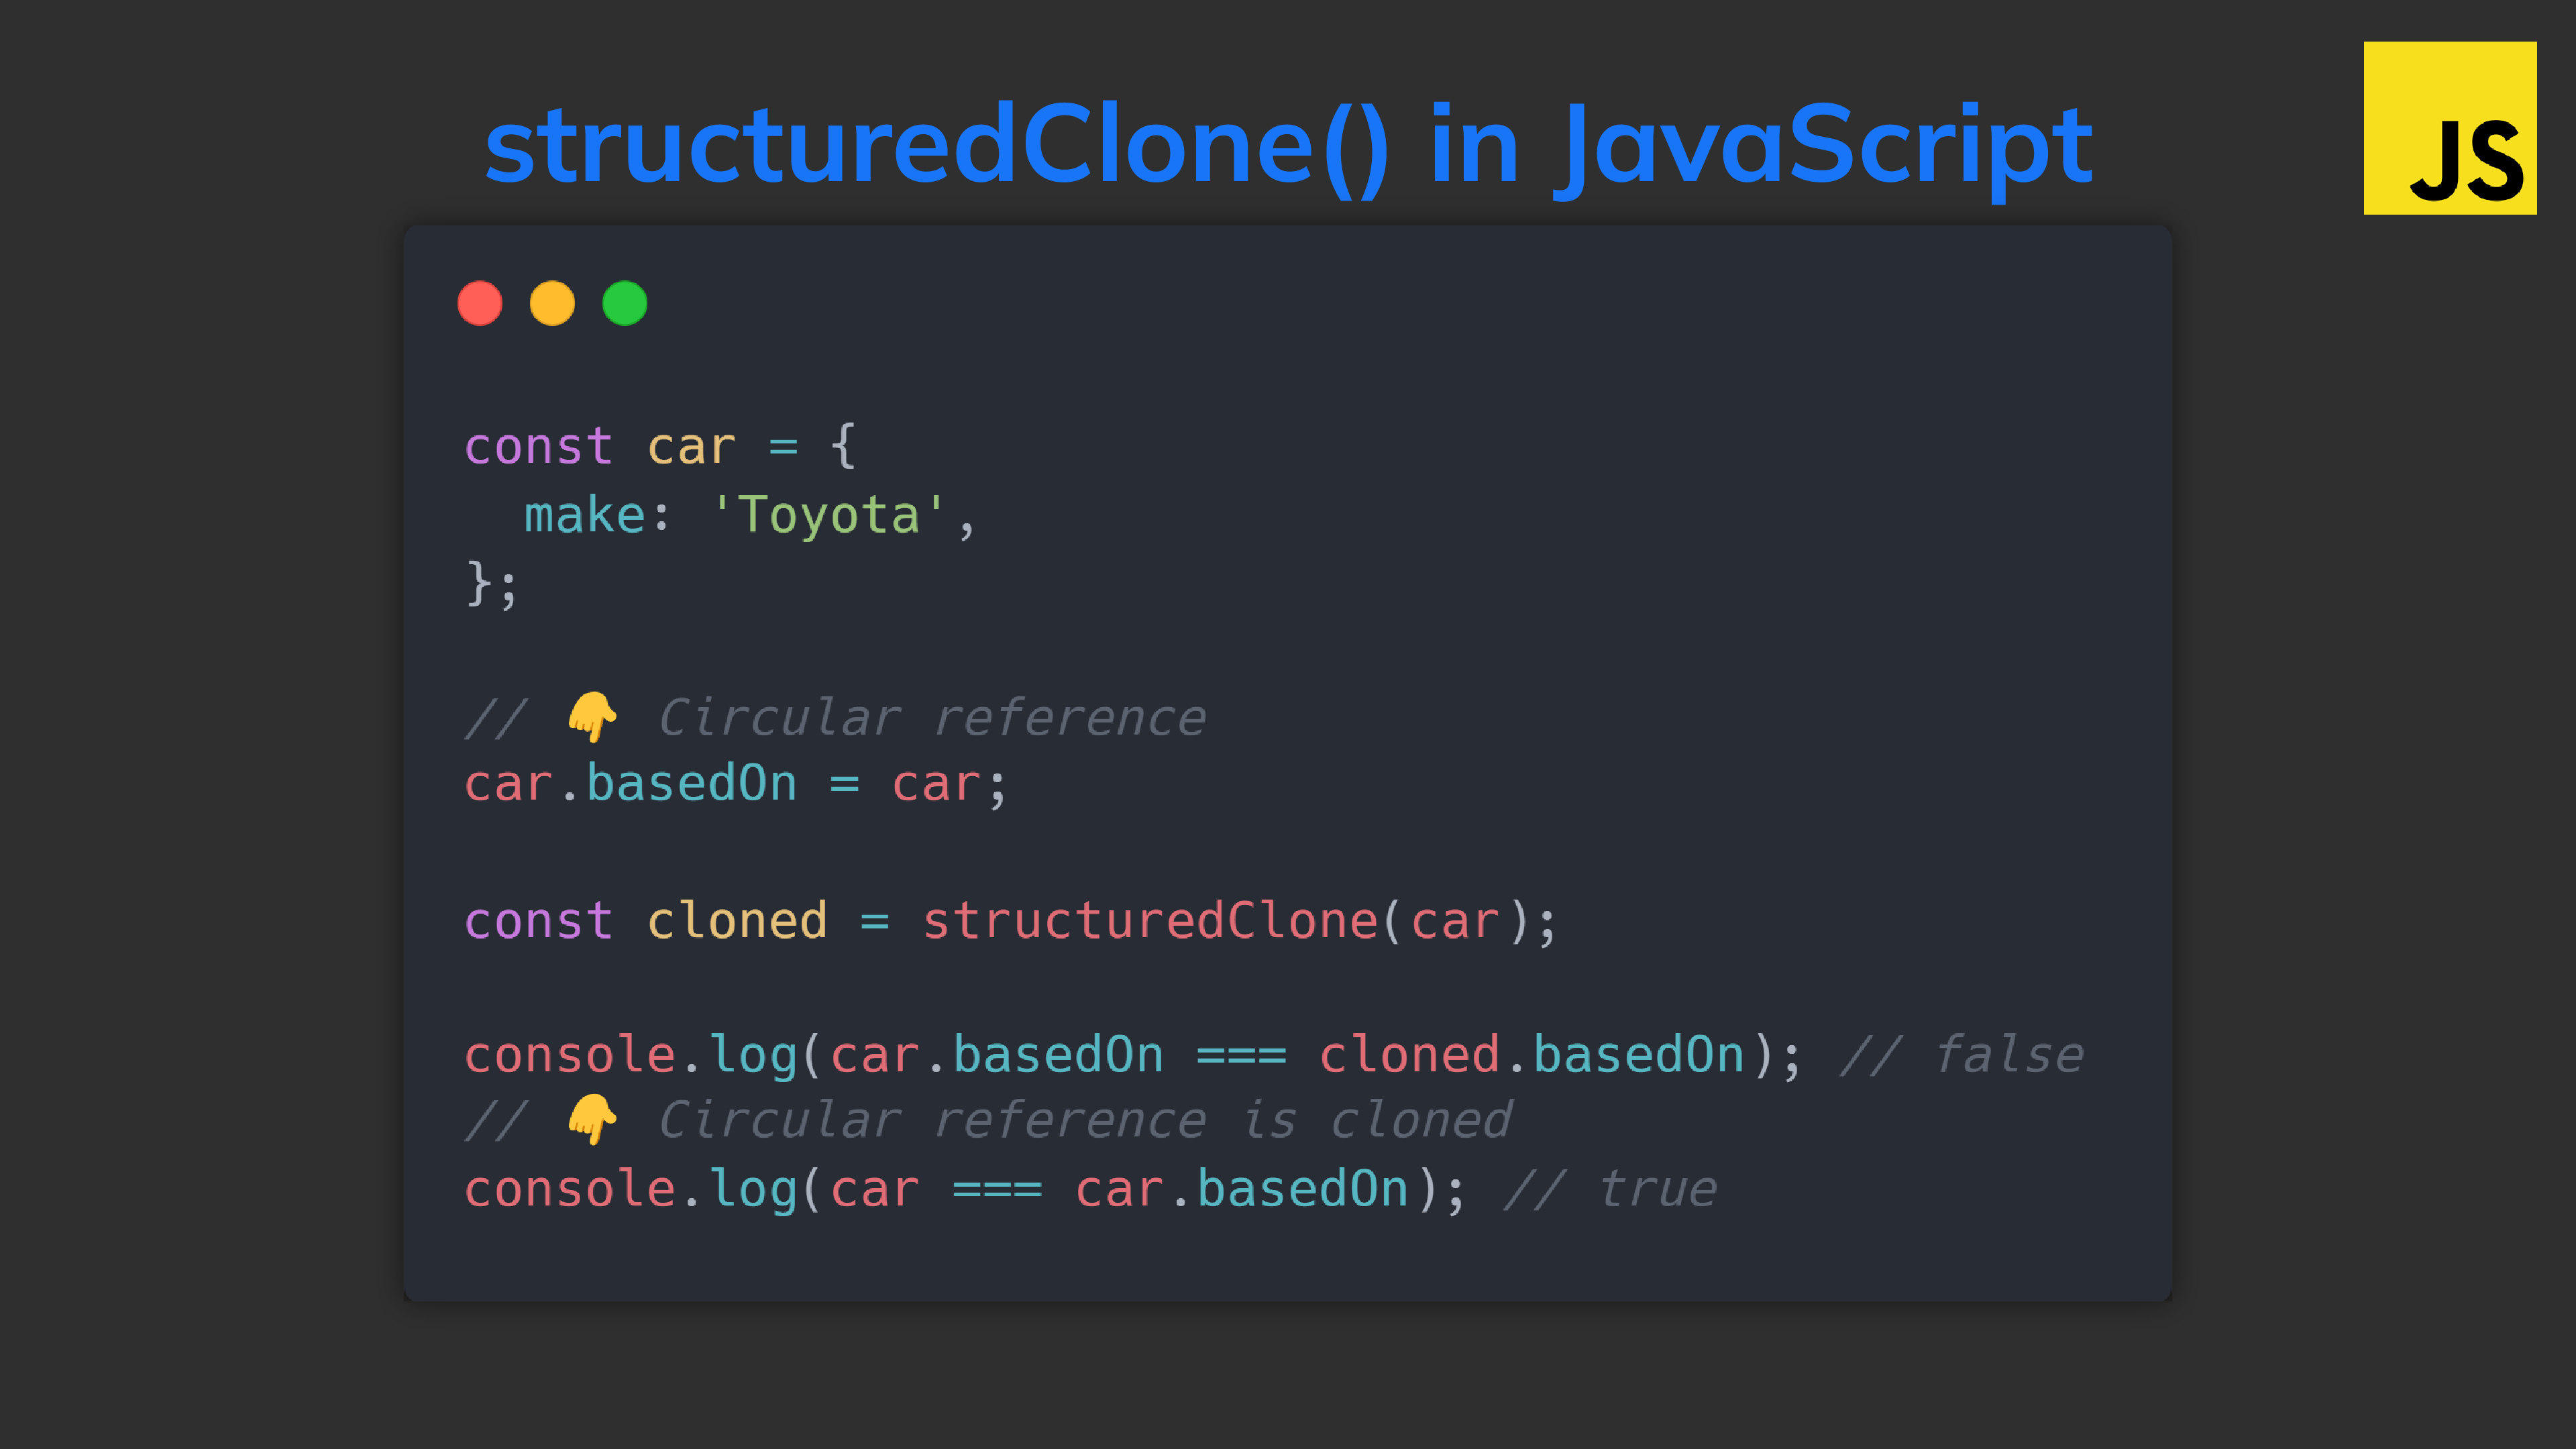 structuredClone(): The easiest way to deep copy objects in JavaScript